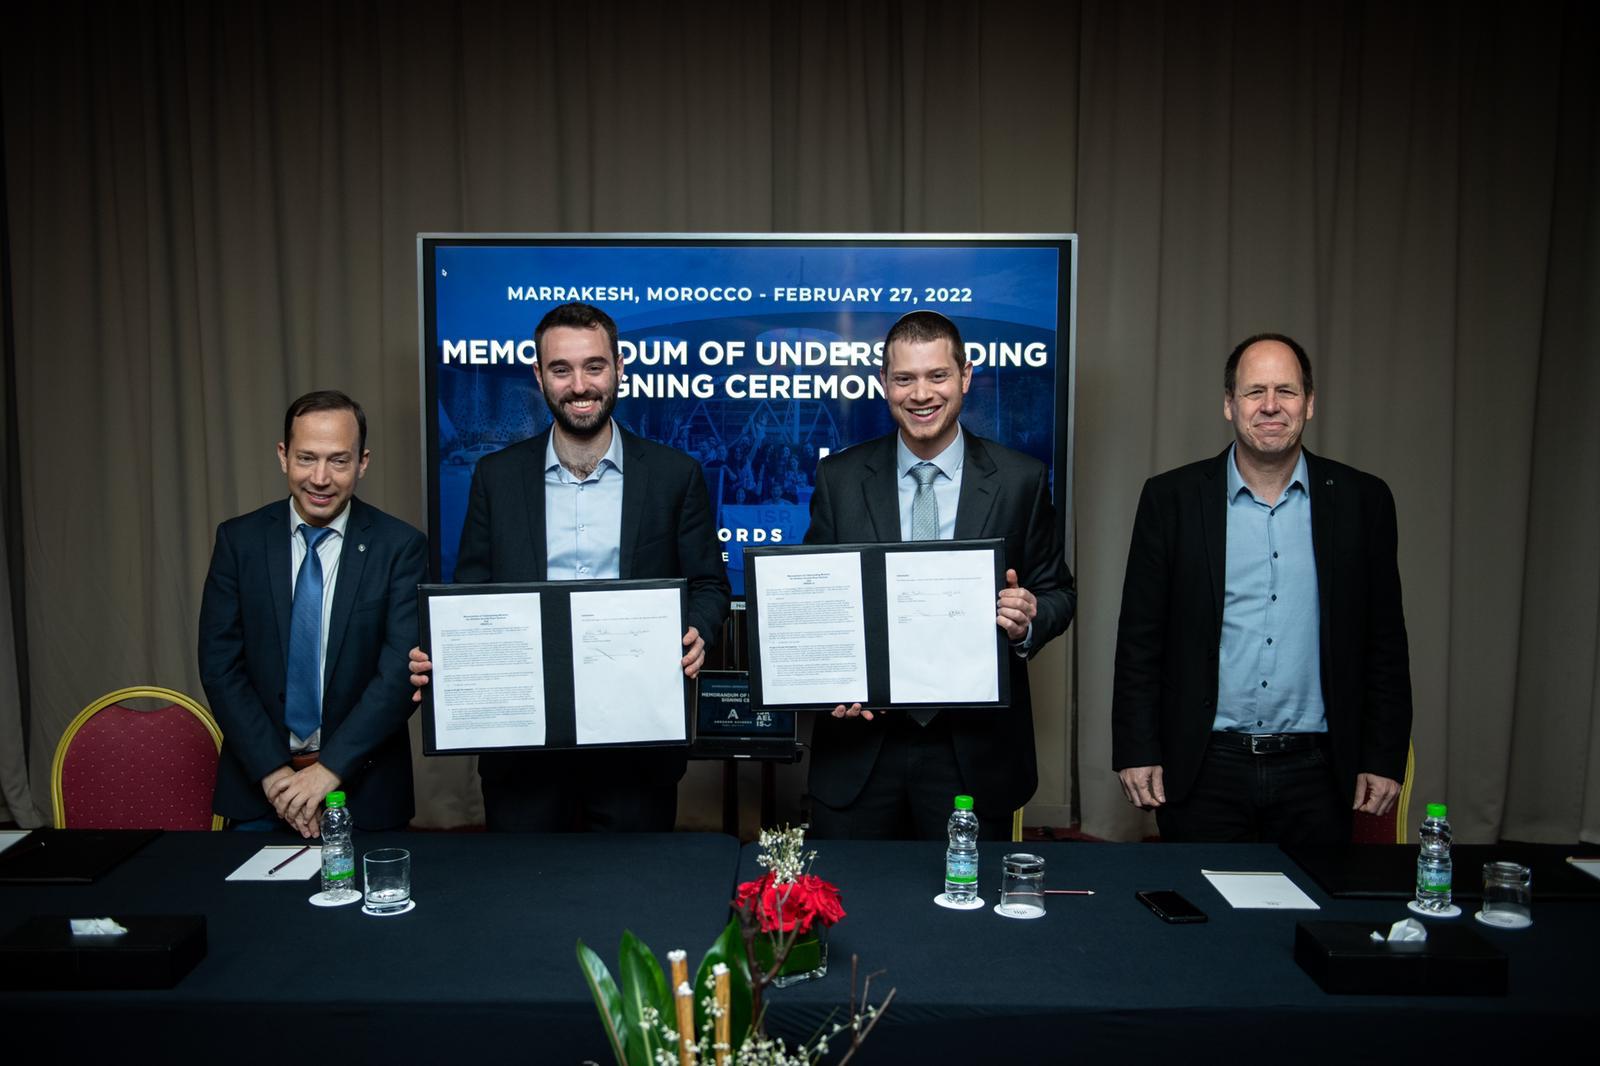 AAPI Israel Director Asher Fredman and Eyal Biram, Chief Executive Officer of Israel-IS participated in an MOU Signing Ceremony in Marrakesh, Morocco.